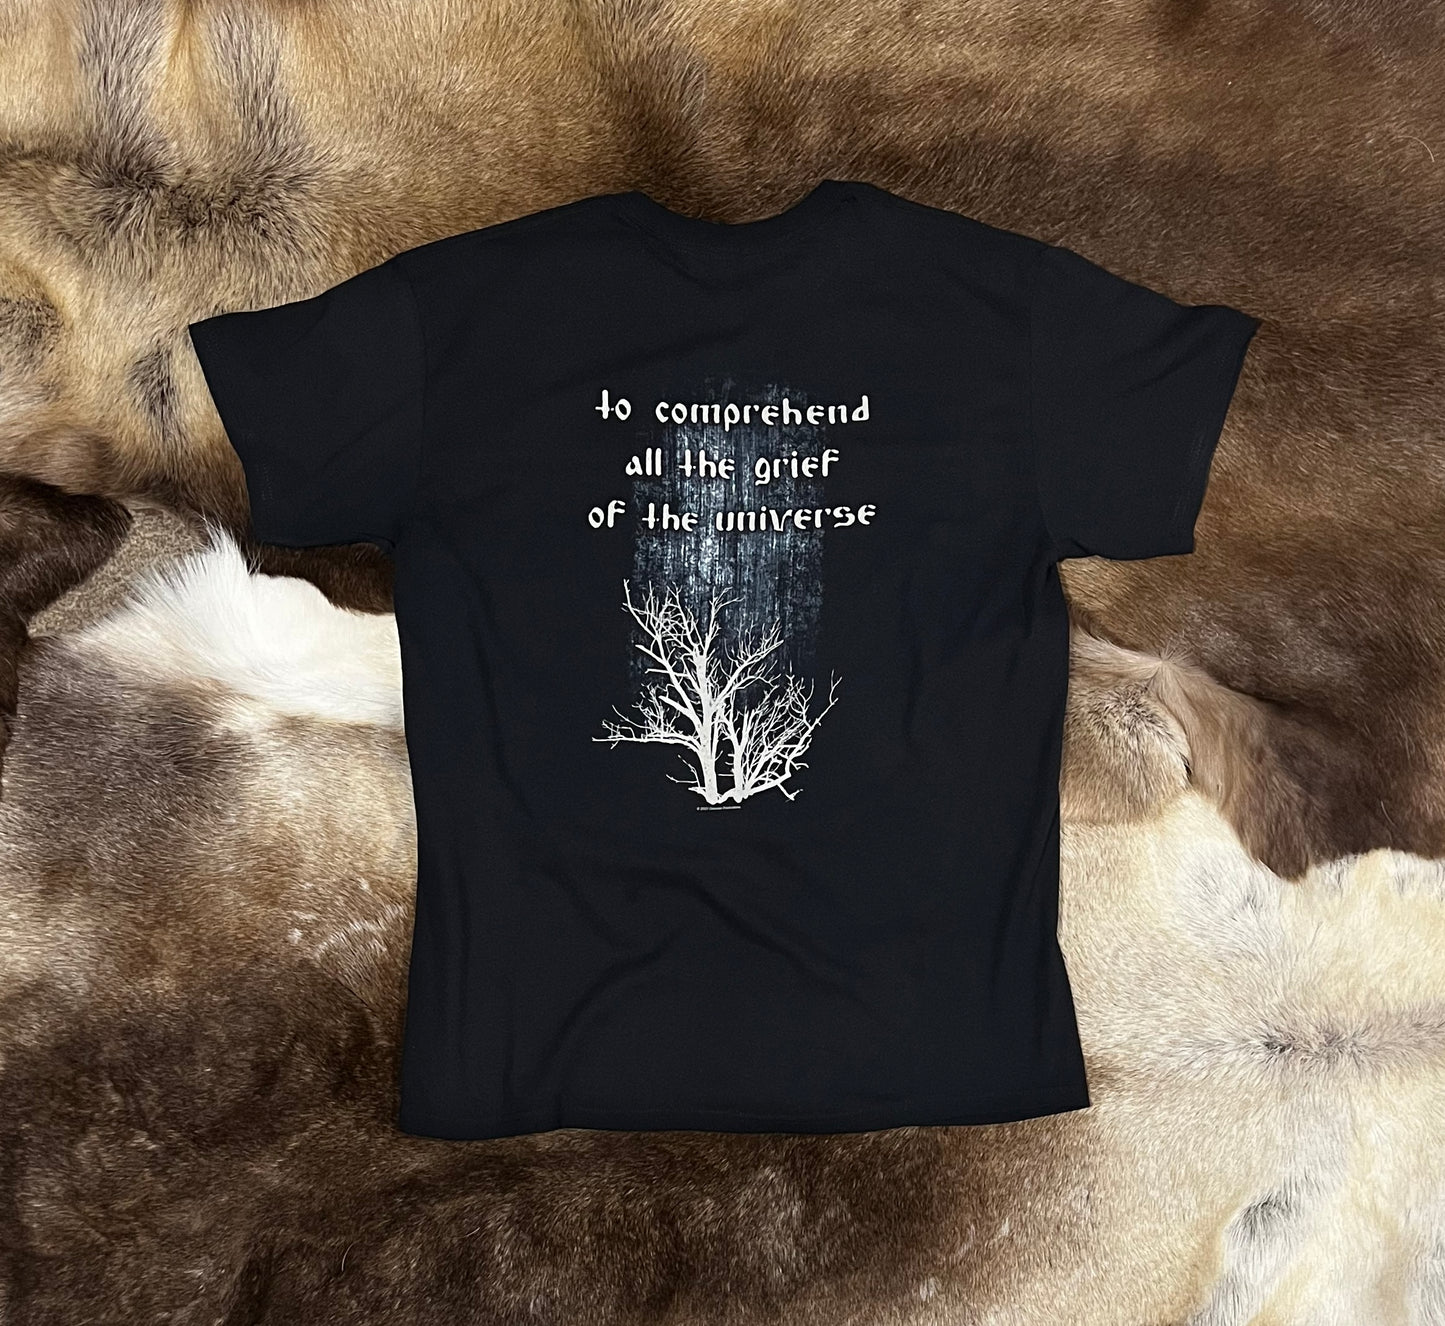 Hate Forest - Sorrow Short Sleeved T-shirt